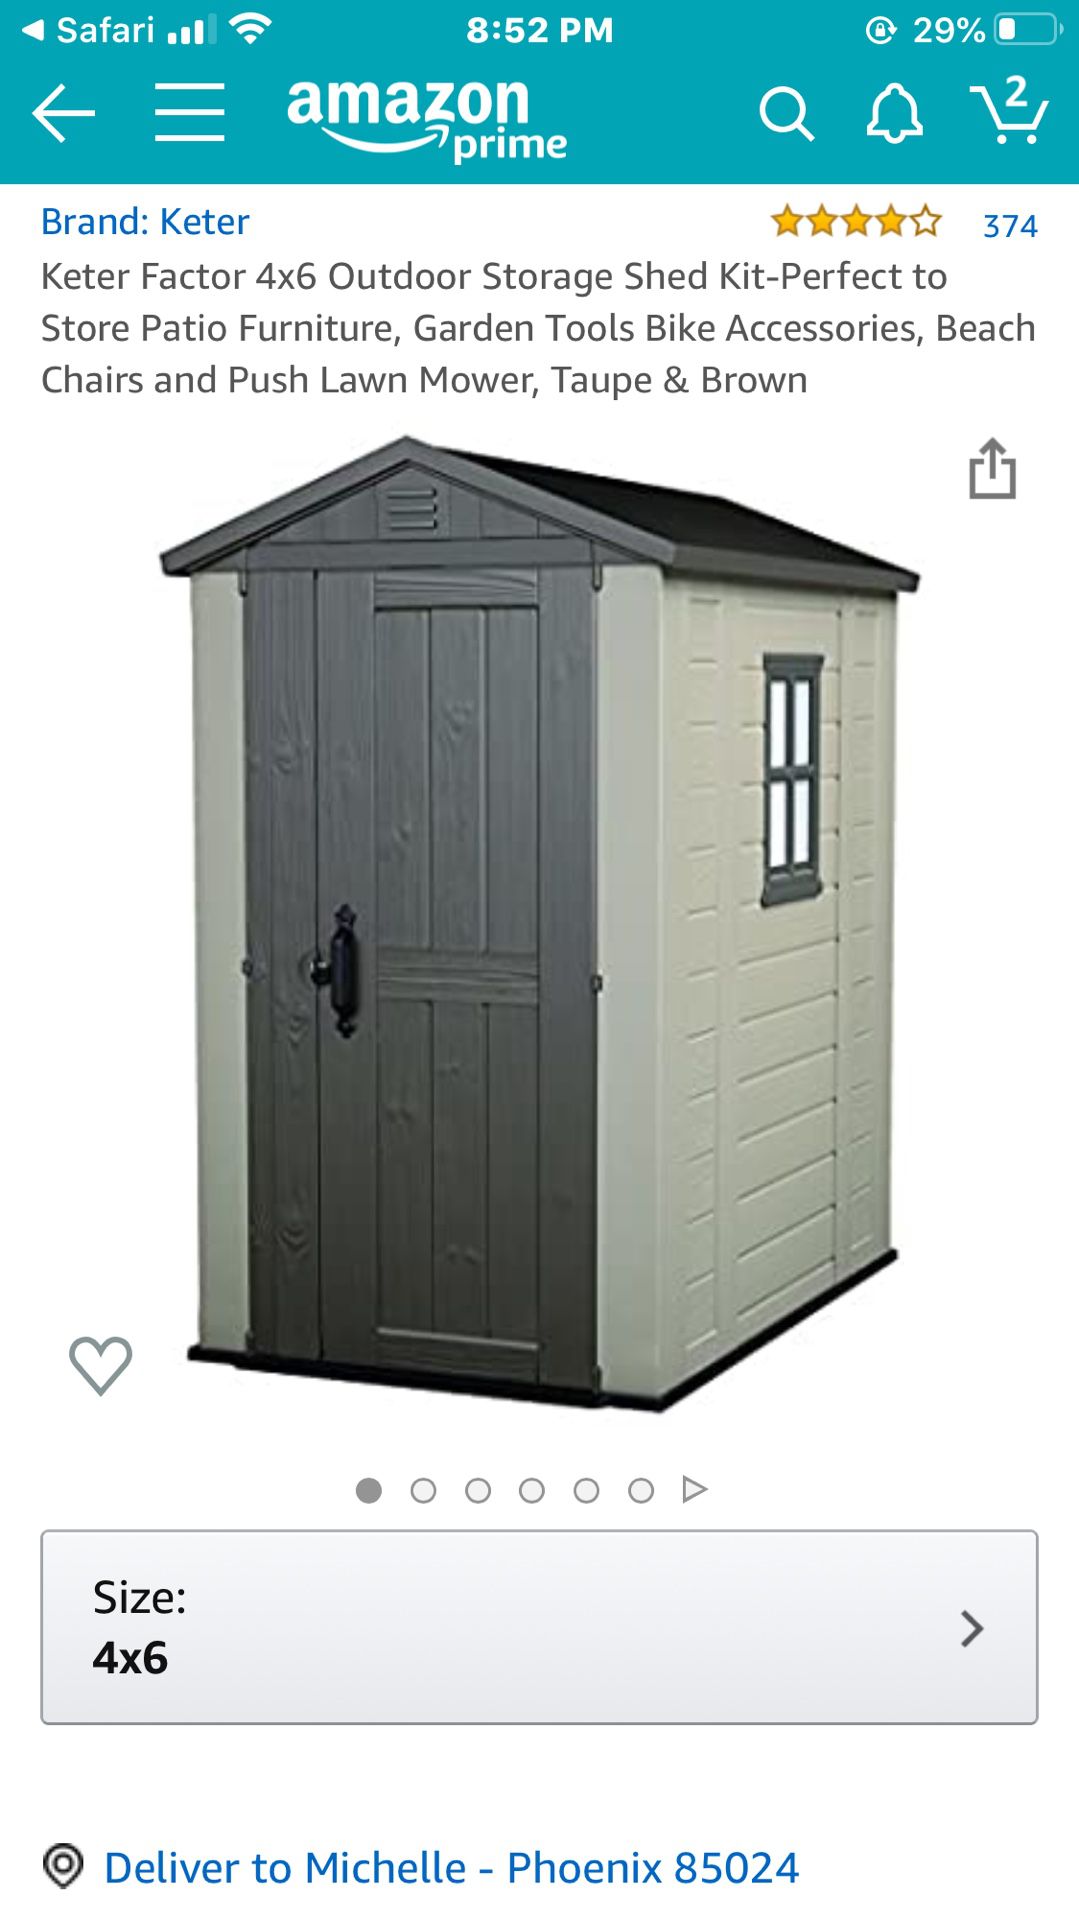 Keter Factor 4x6 Outdoor Storage Shed Kit